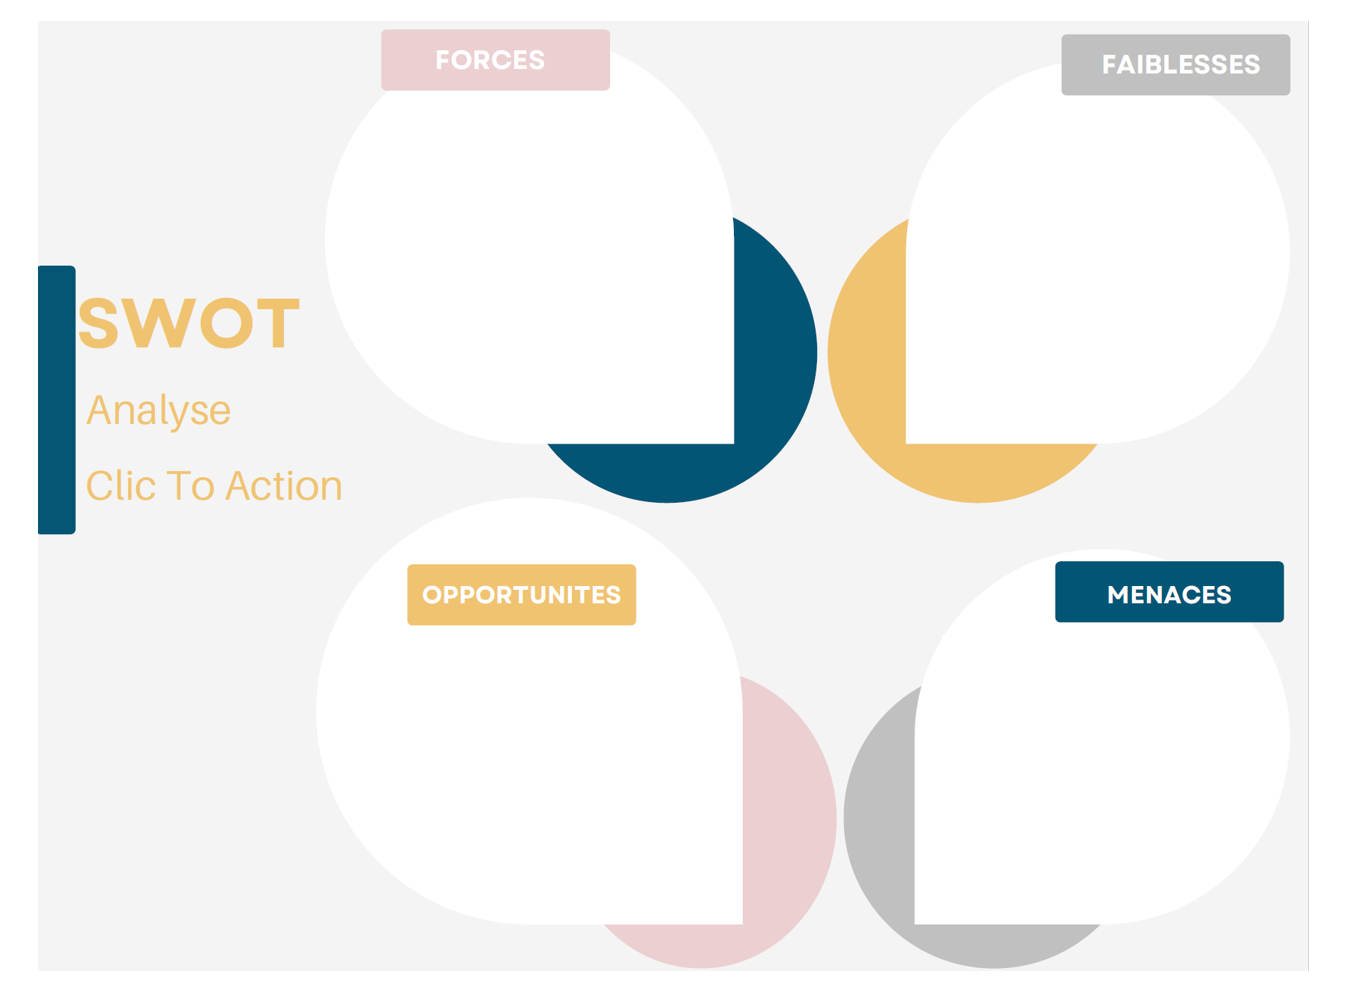 Clic To Action - analyse SWOT